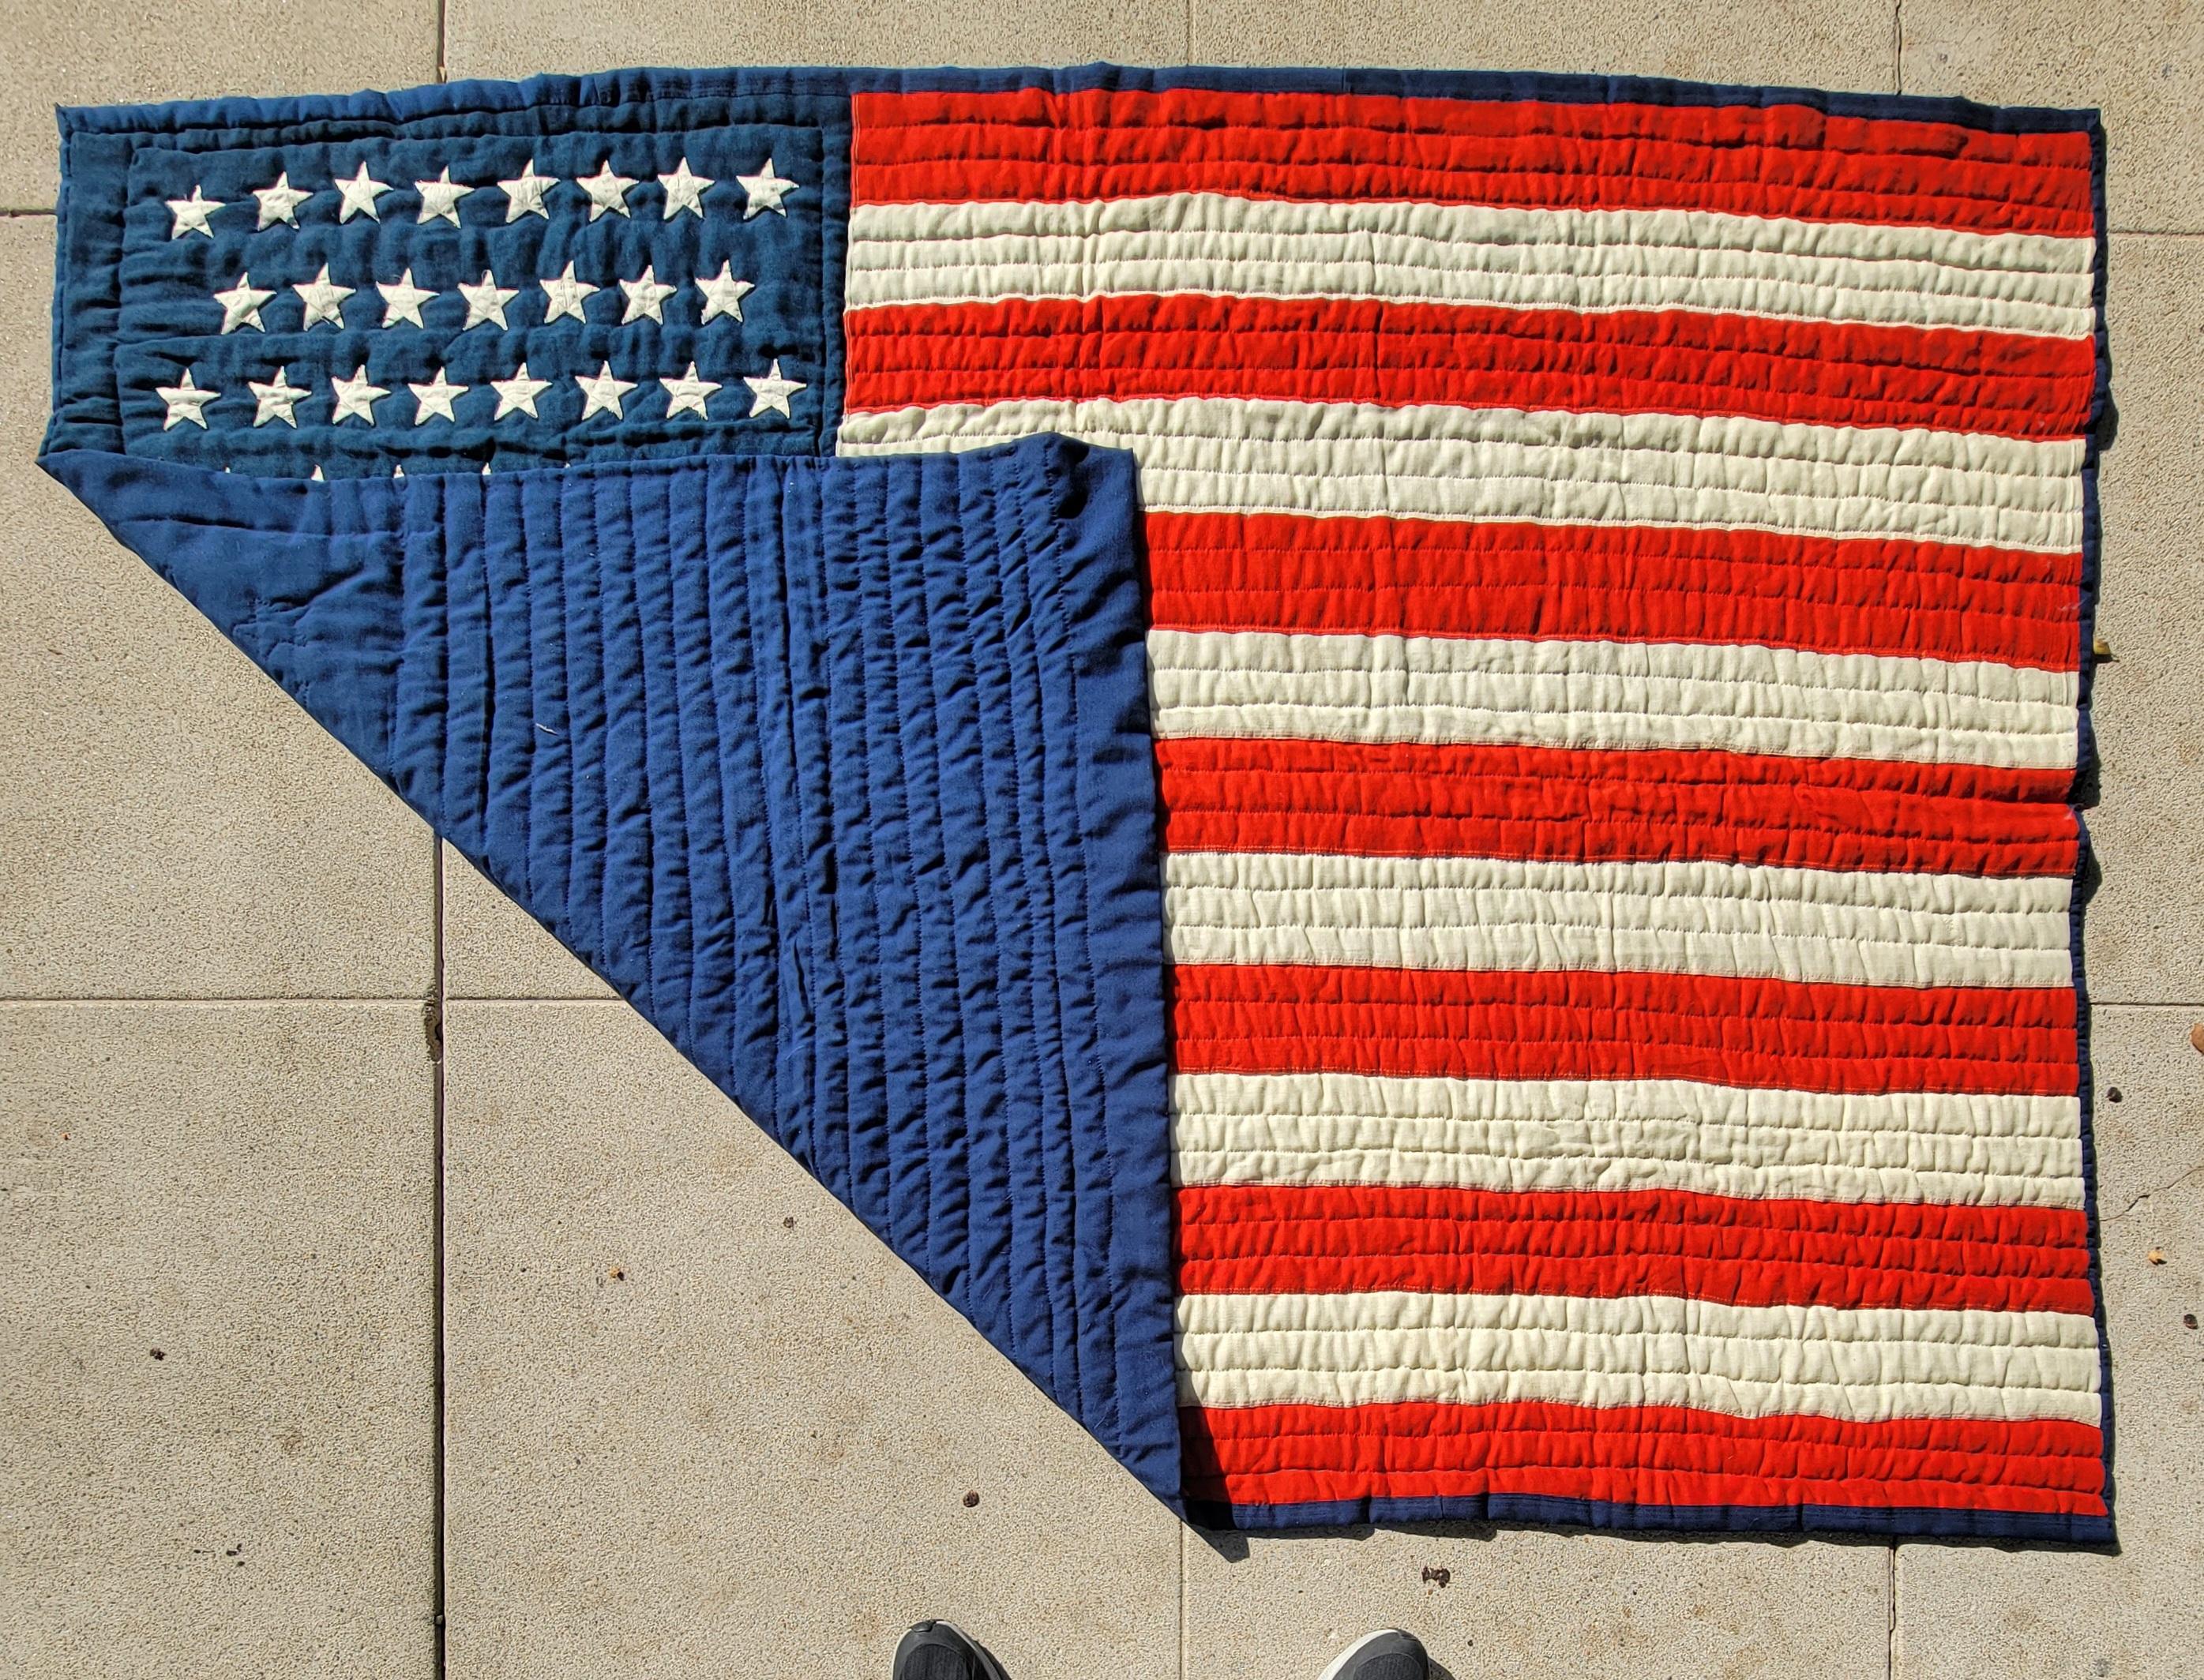 This most unusual wool flag quilt with 45 stars and all hand sewn & quilted through out.The condition is very good and has a blue cotton backing that matches the blue in the front of the flag. This is such a folky and most unusual flag quilt.From a